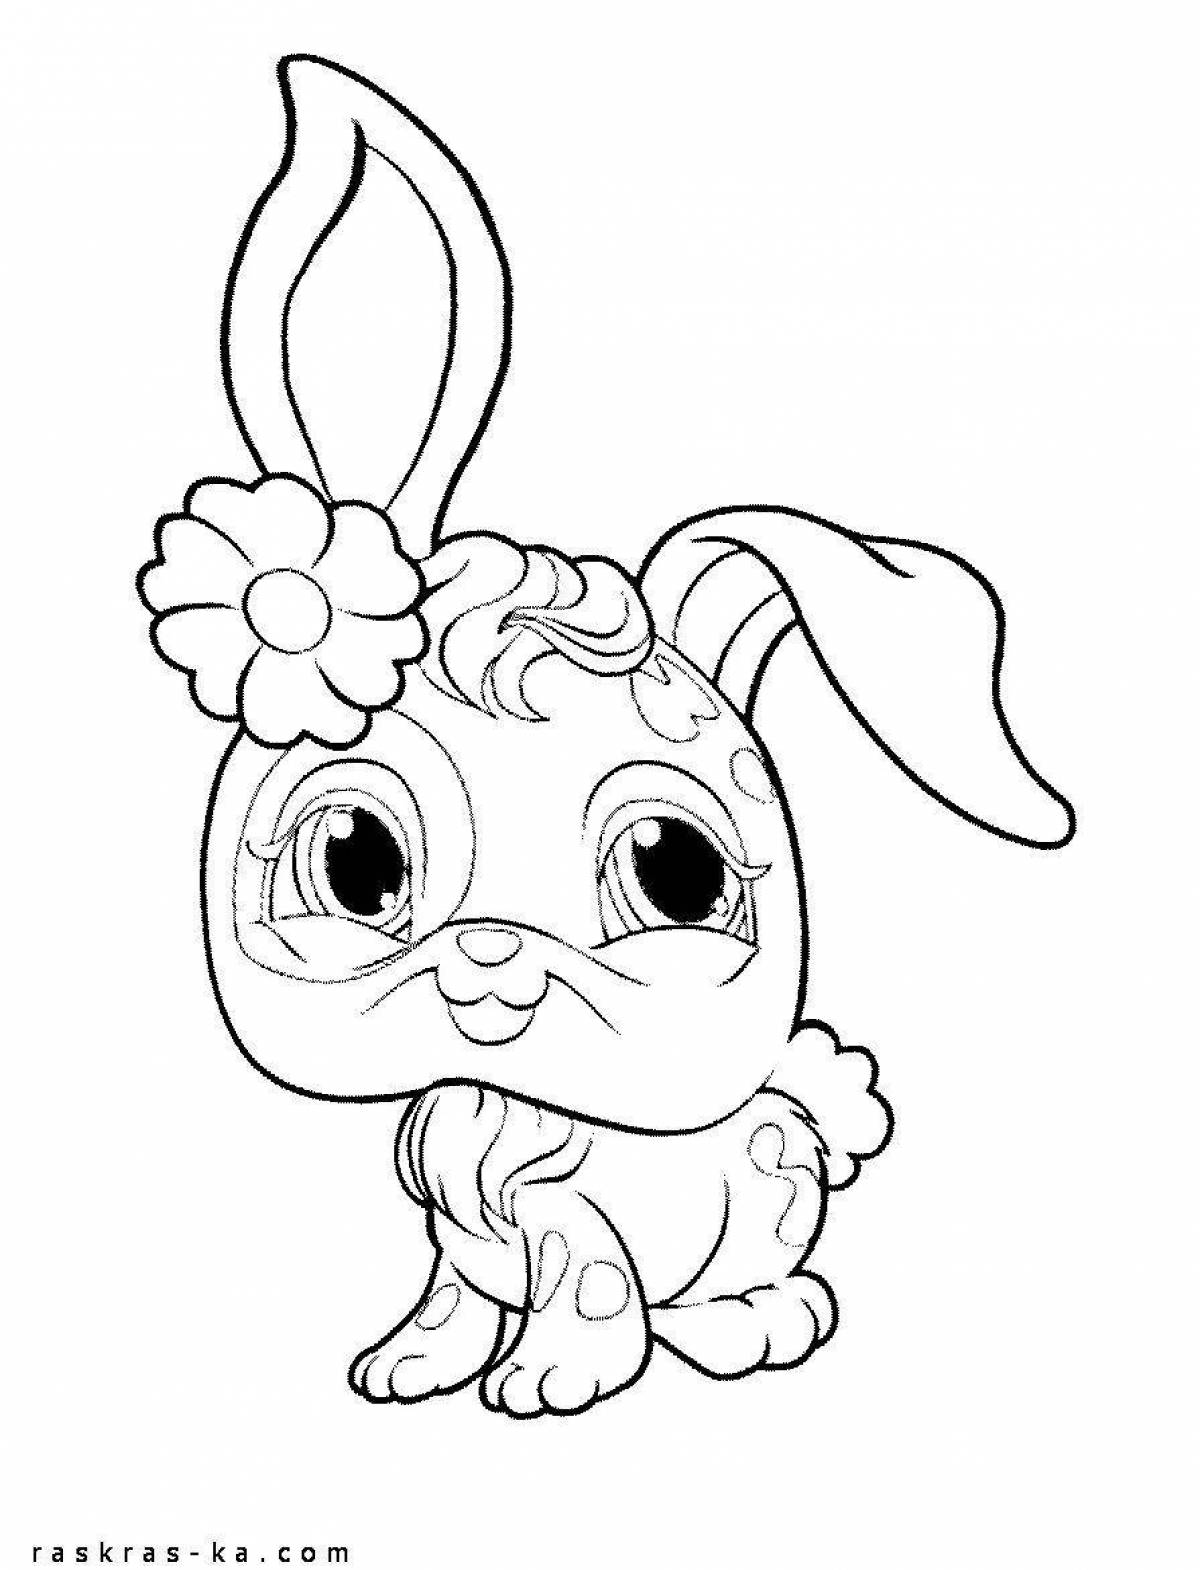 Amazing lps coloring page